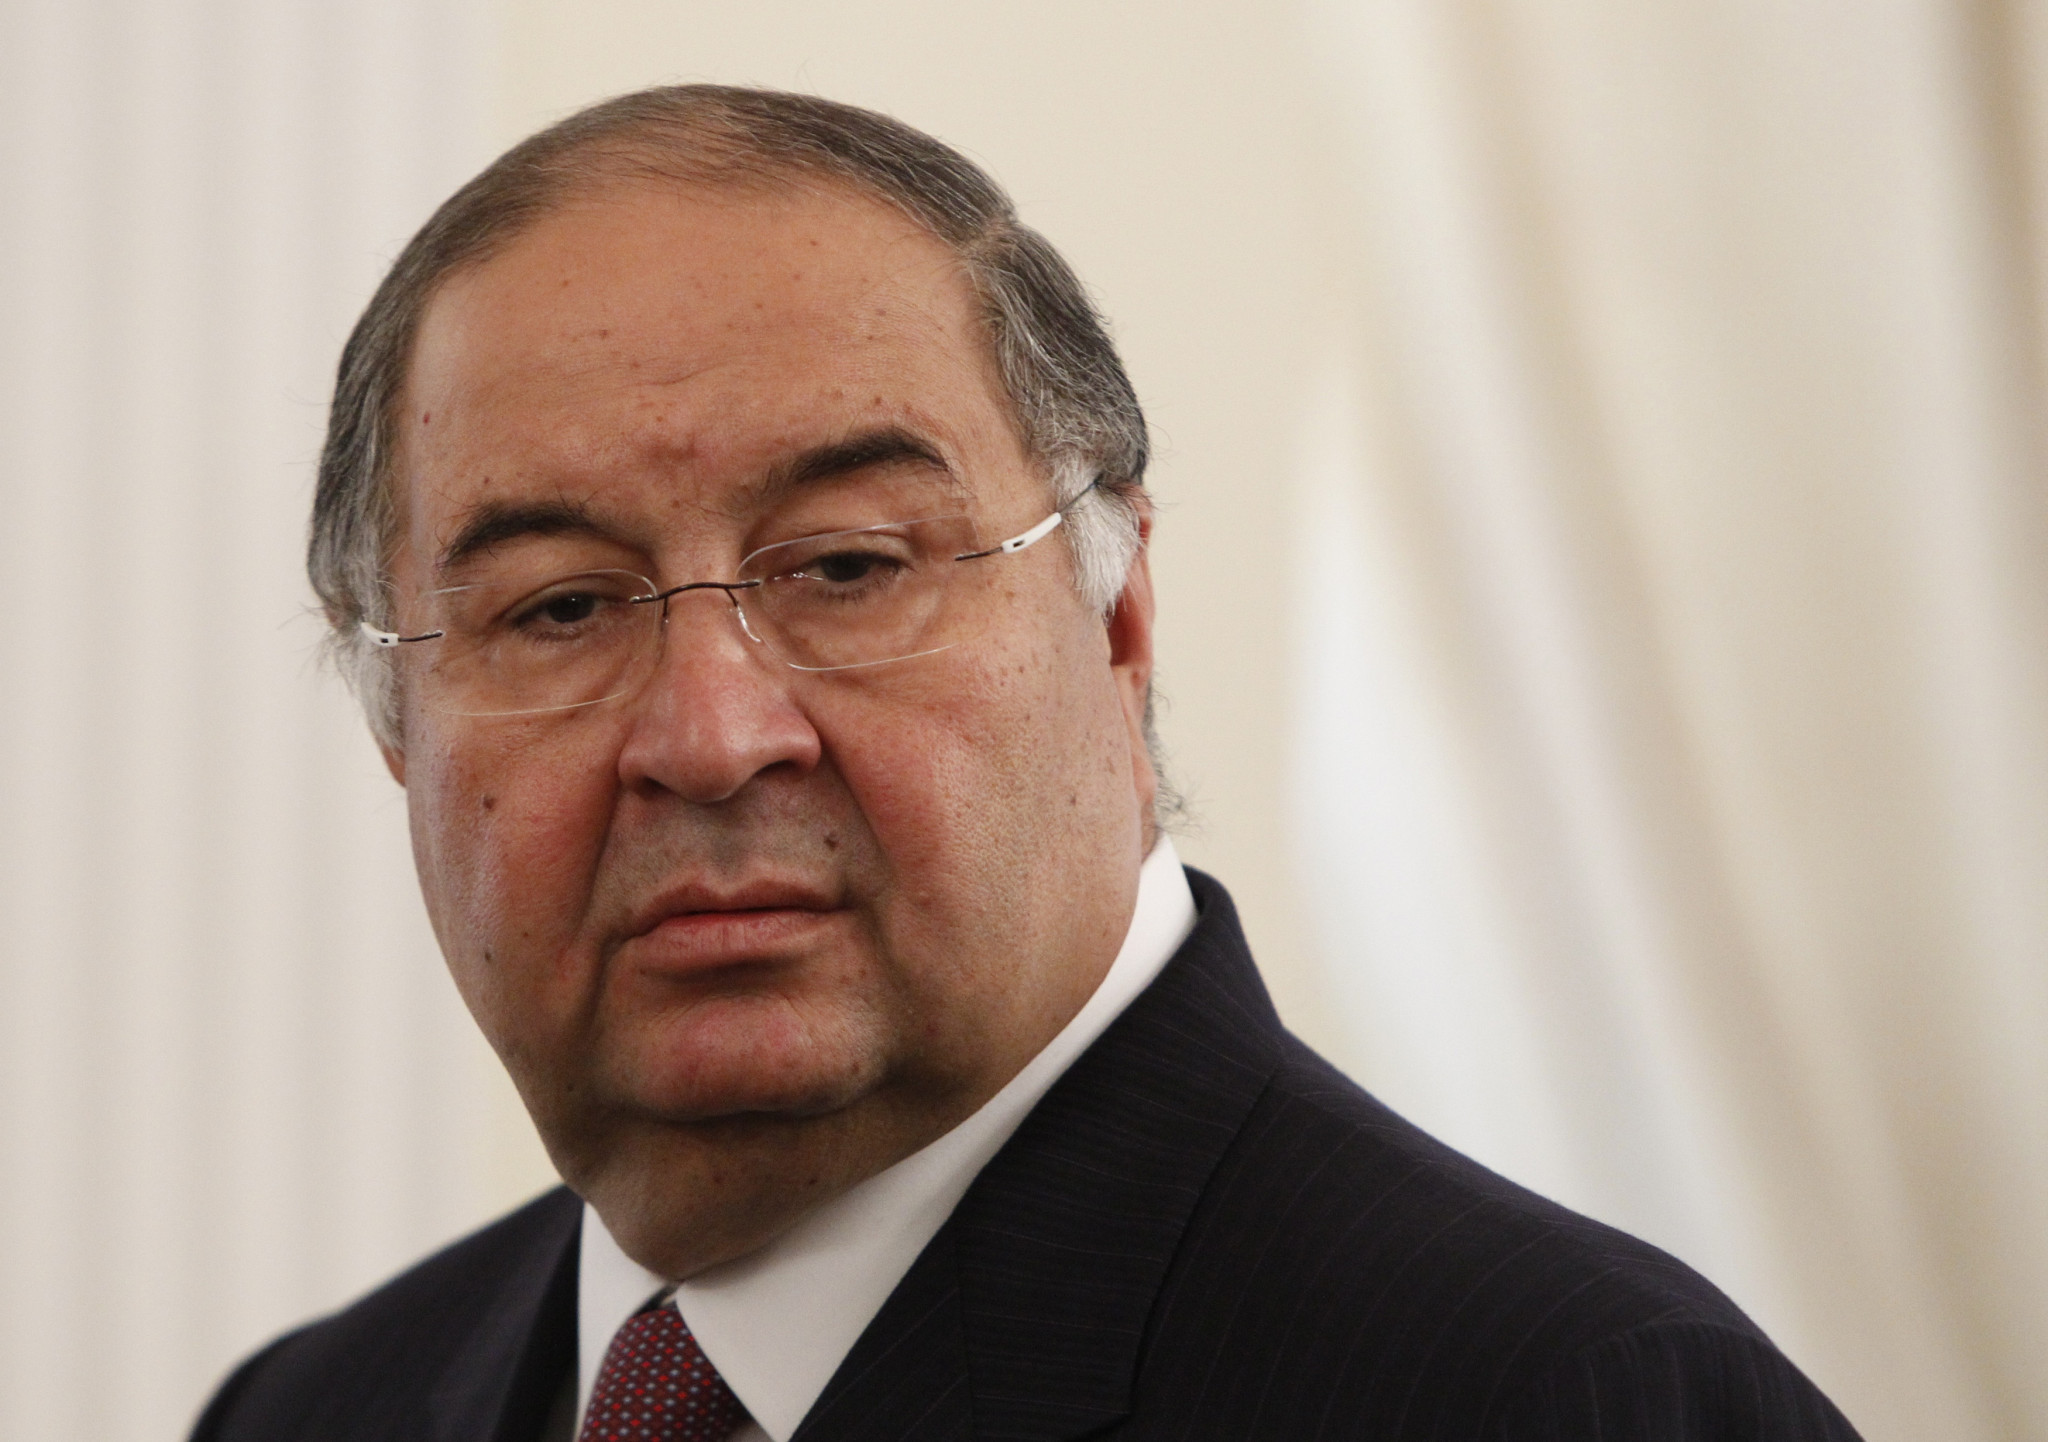 Alisher Usmanov announced plans to make fencing one of the most popular sports on the Olympic programme ©Getty Images